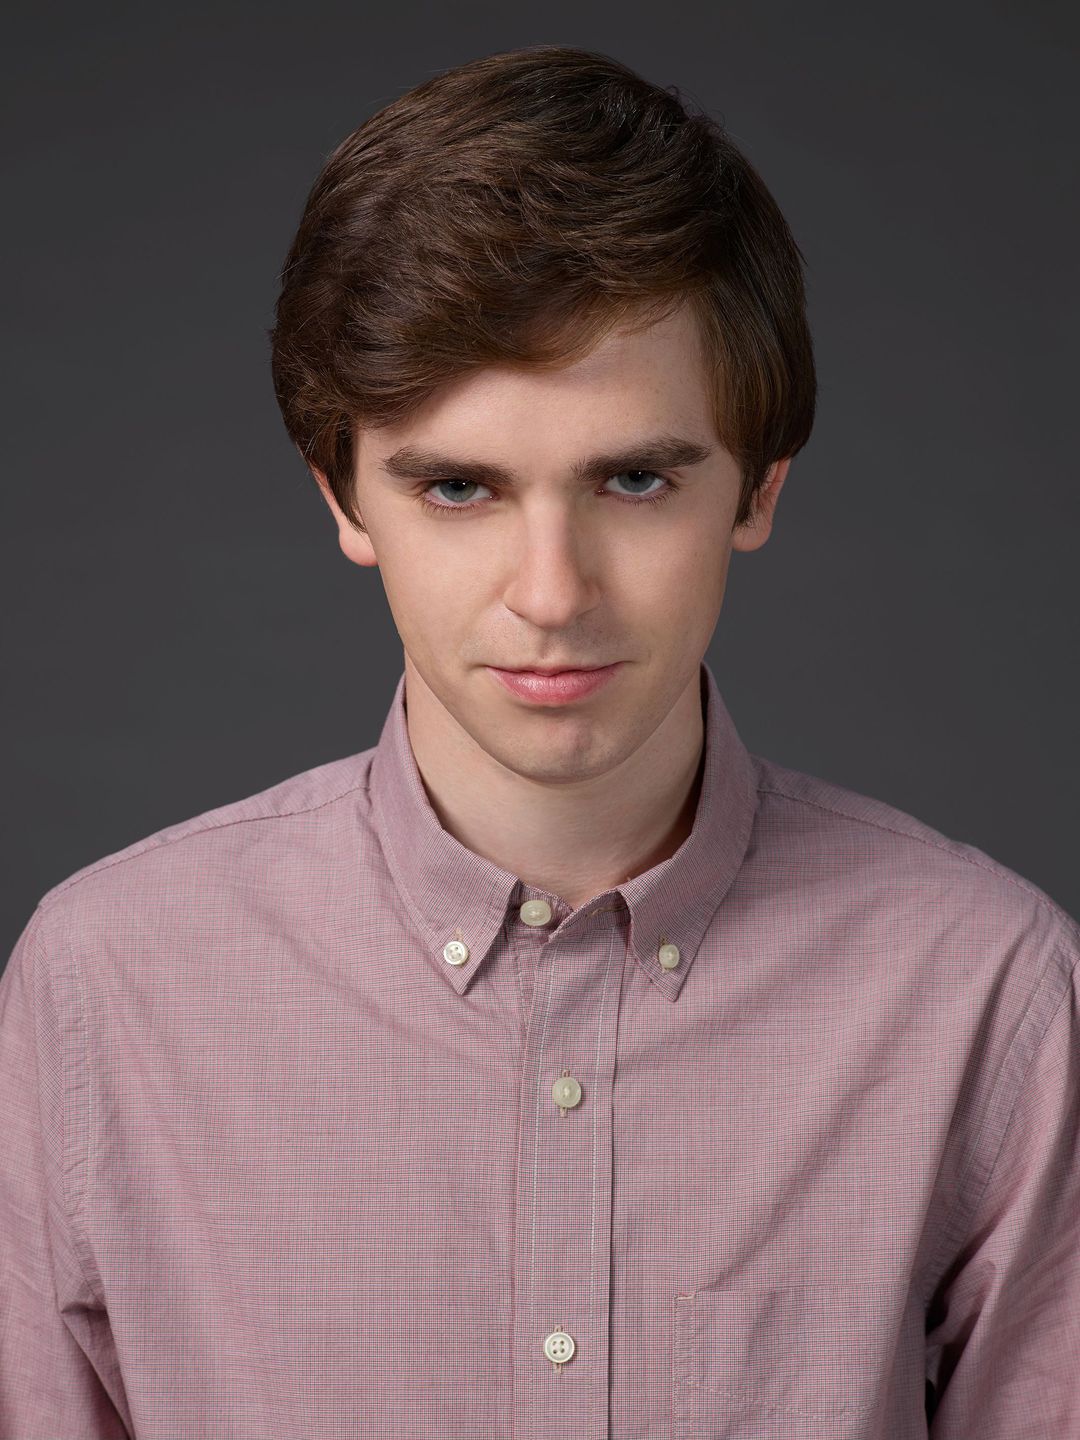 Freddie Highmore young age